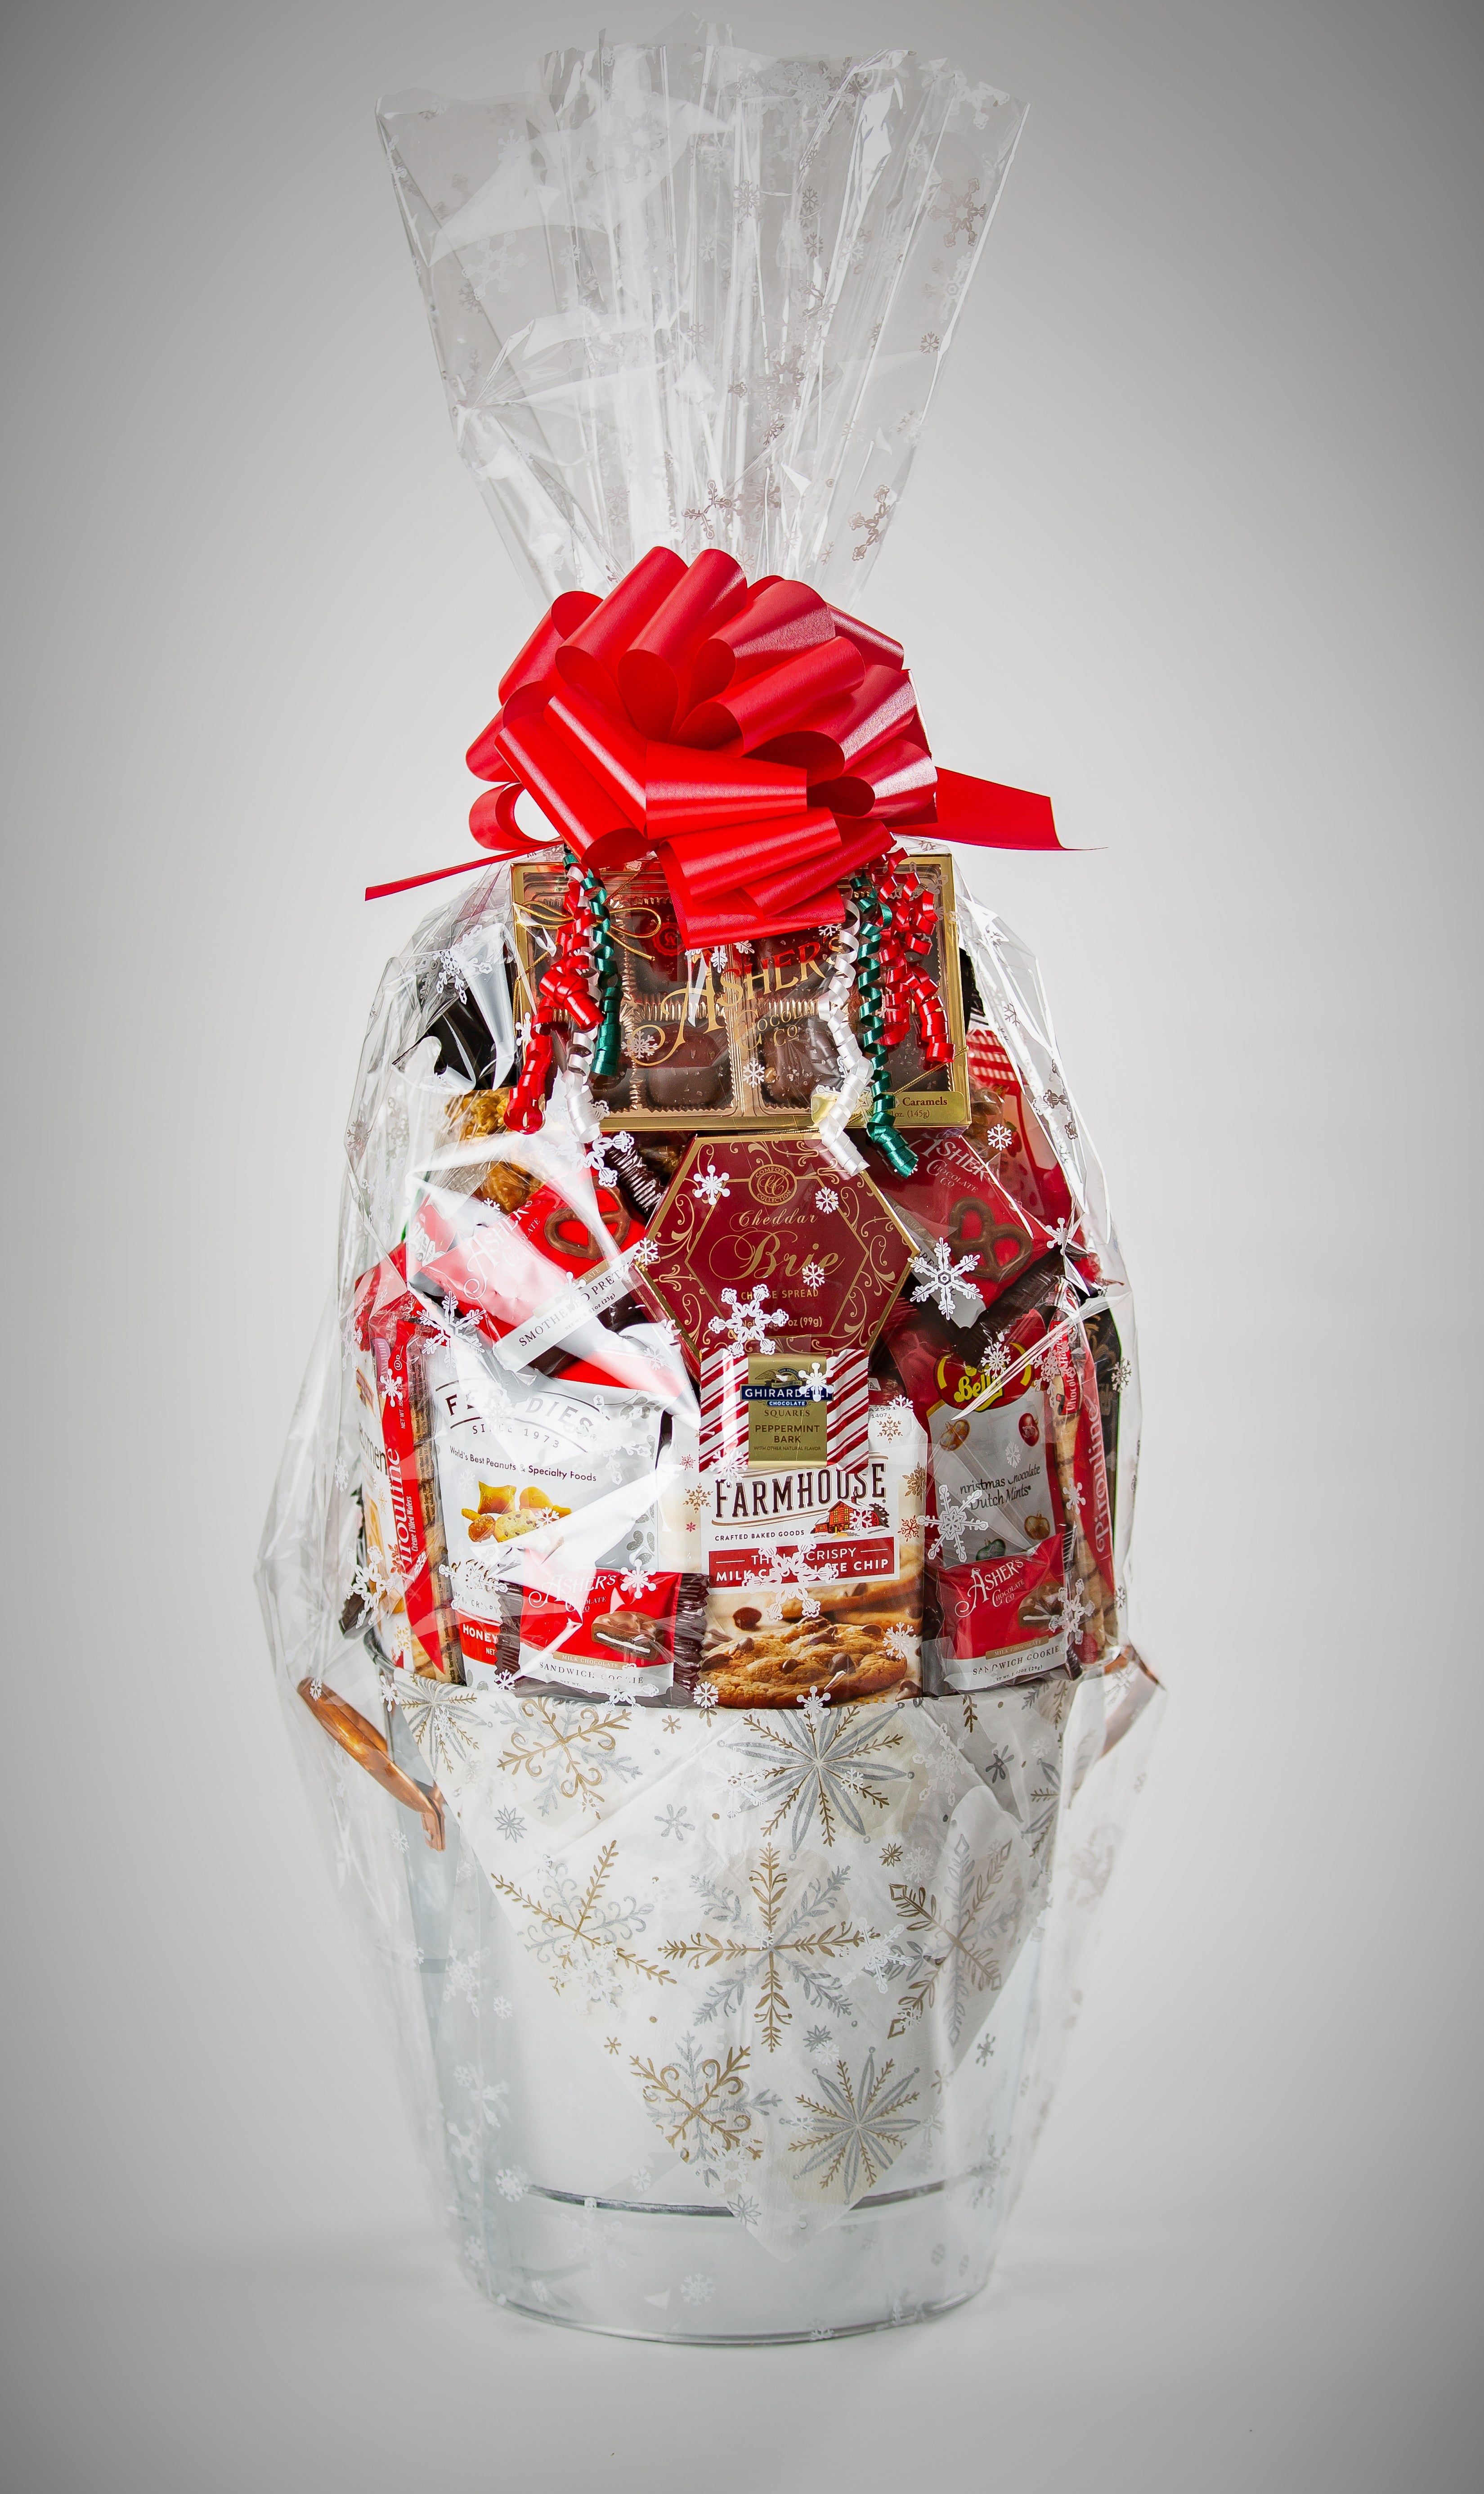 Corporate Gifts & Baskets